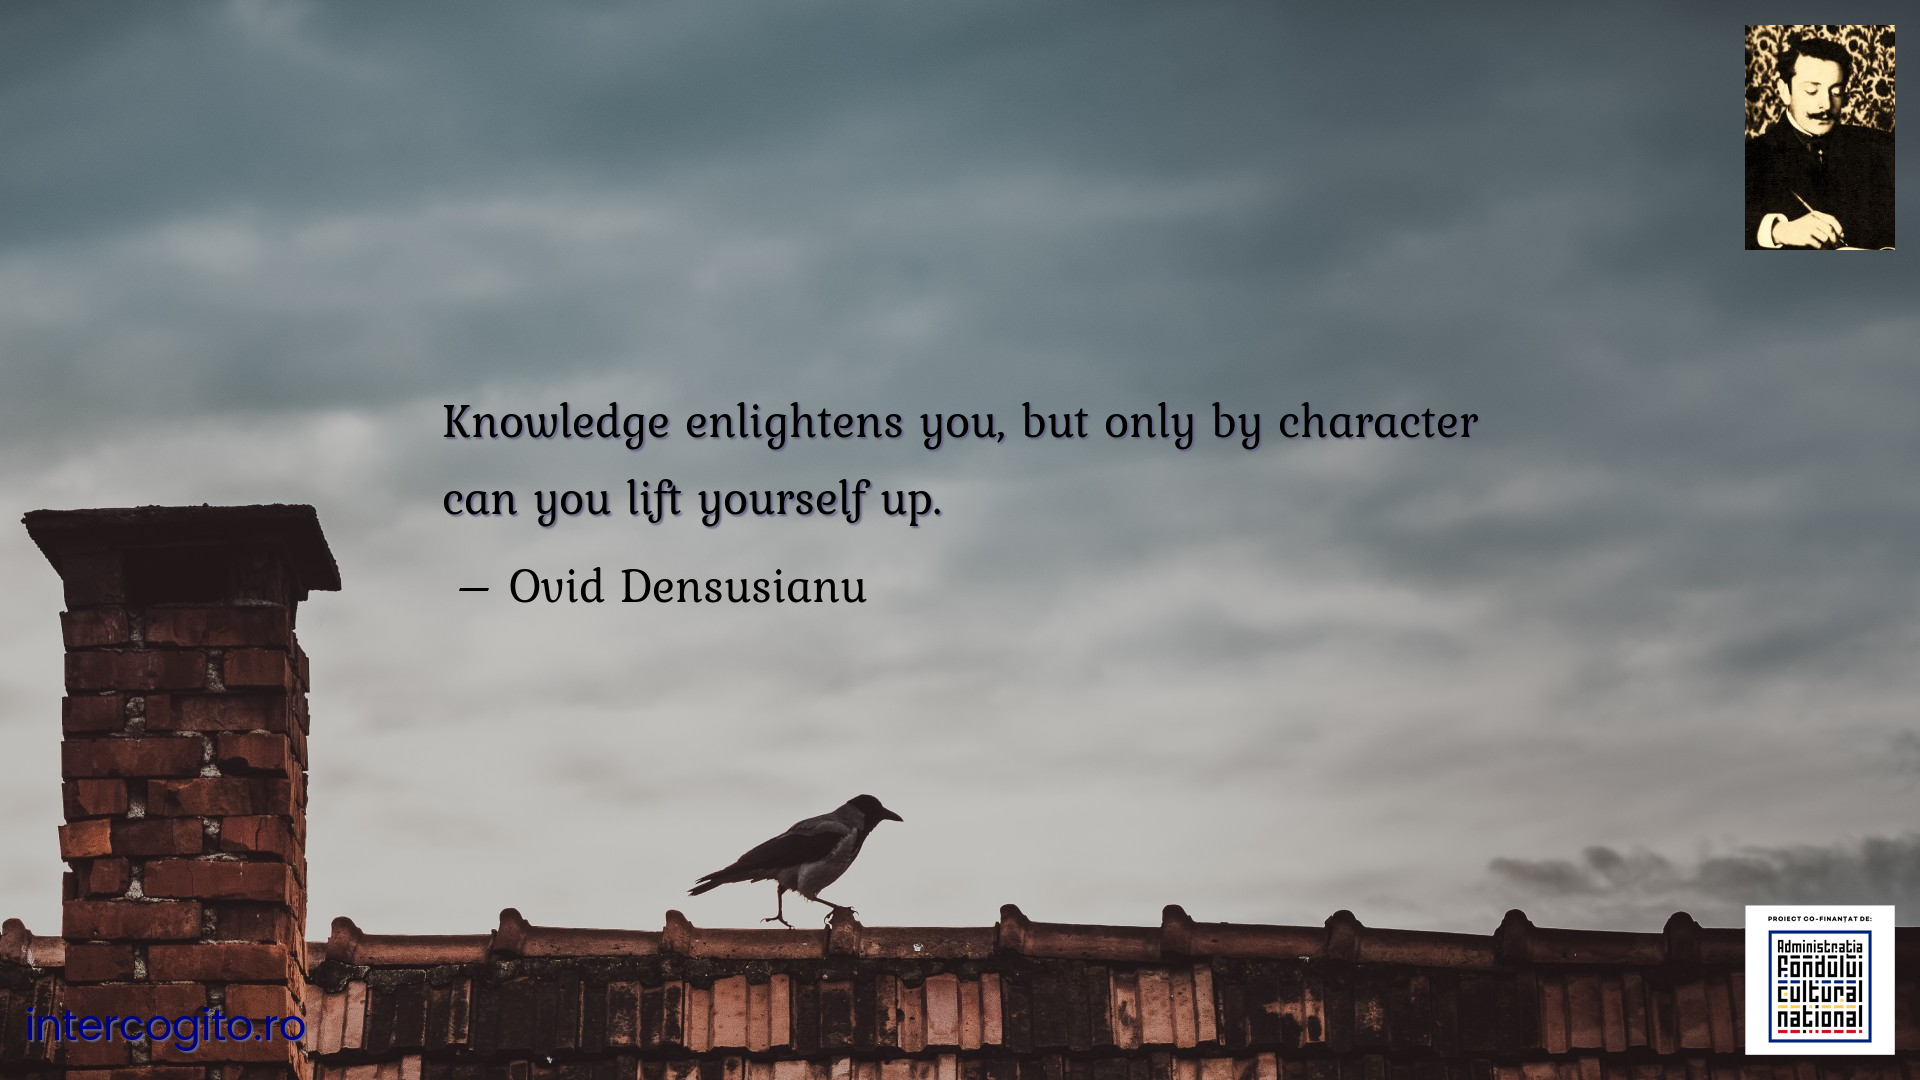 Knowledge enlightens you, but only by character can you lift yourself up.